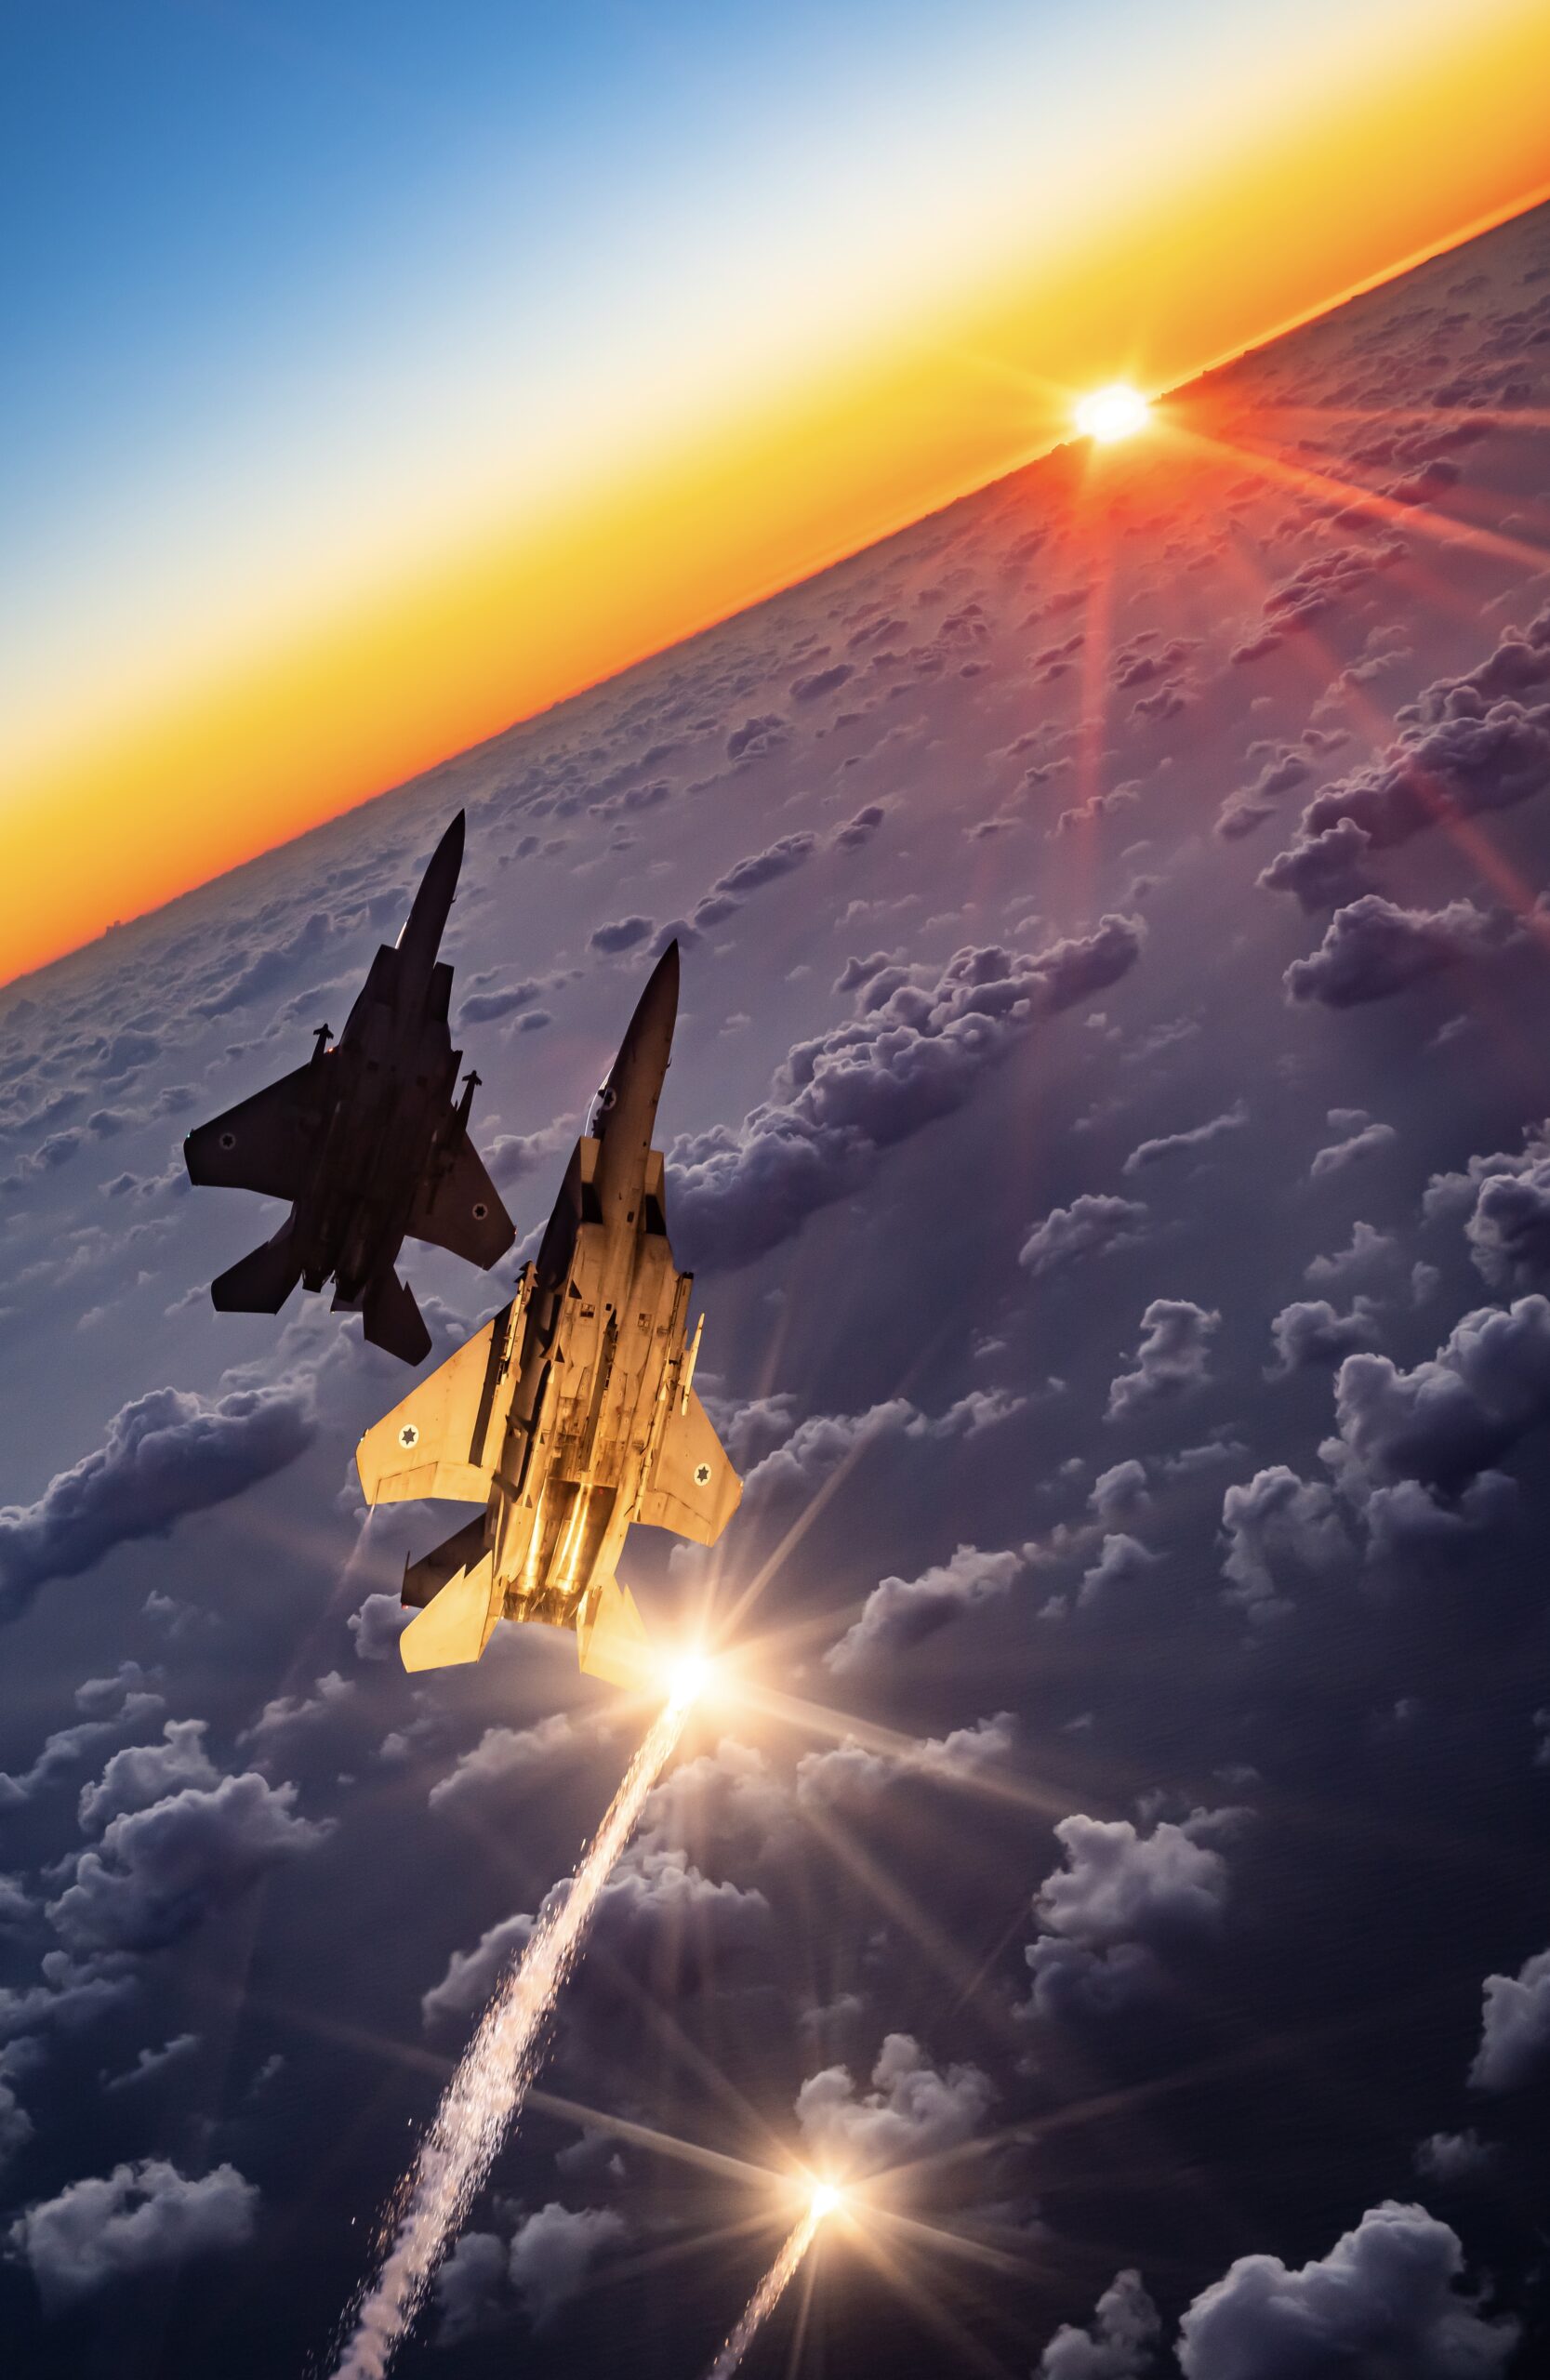 F15 Eagle Resting at Night Is the Wallpaper War Machine of the Day   autoevolution